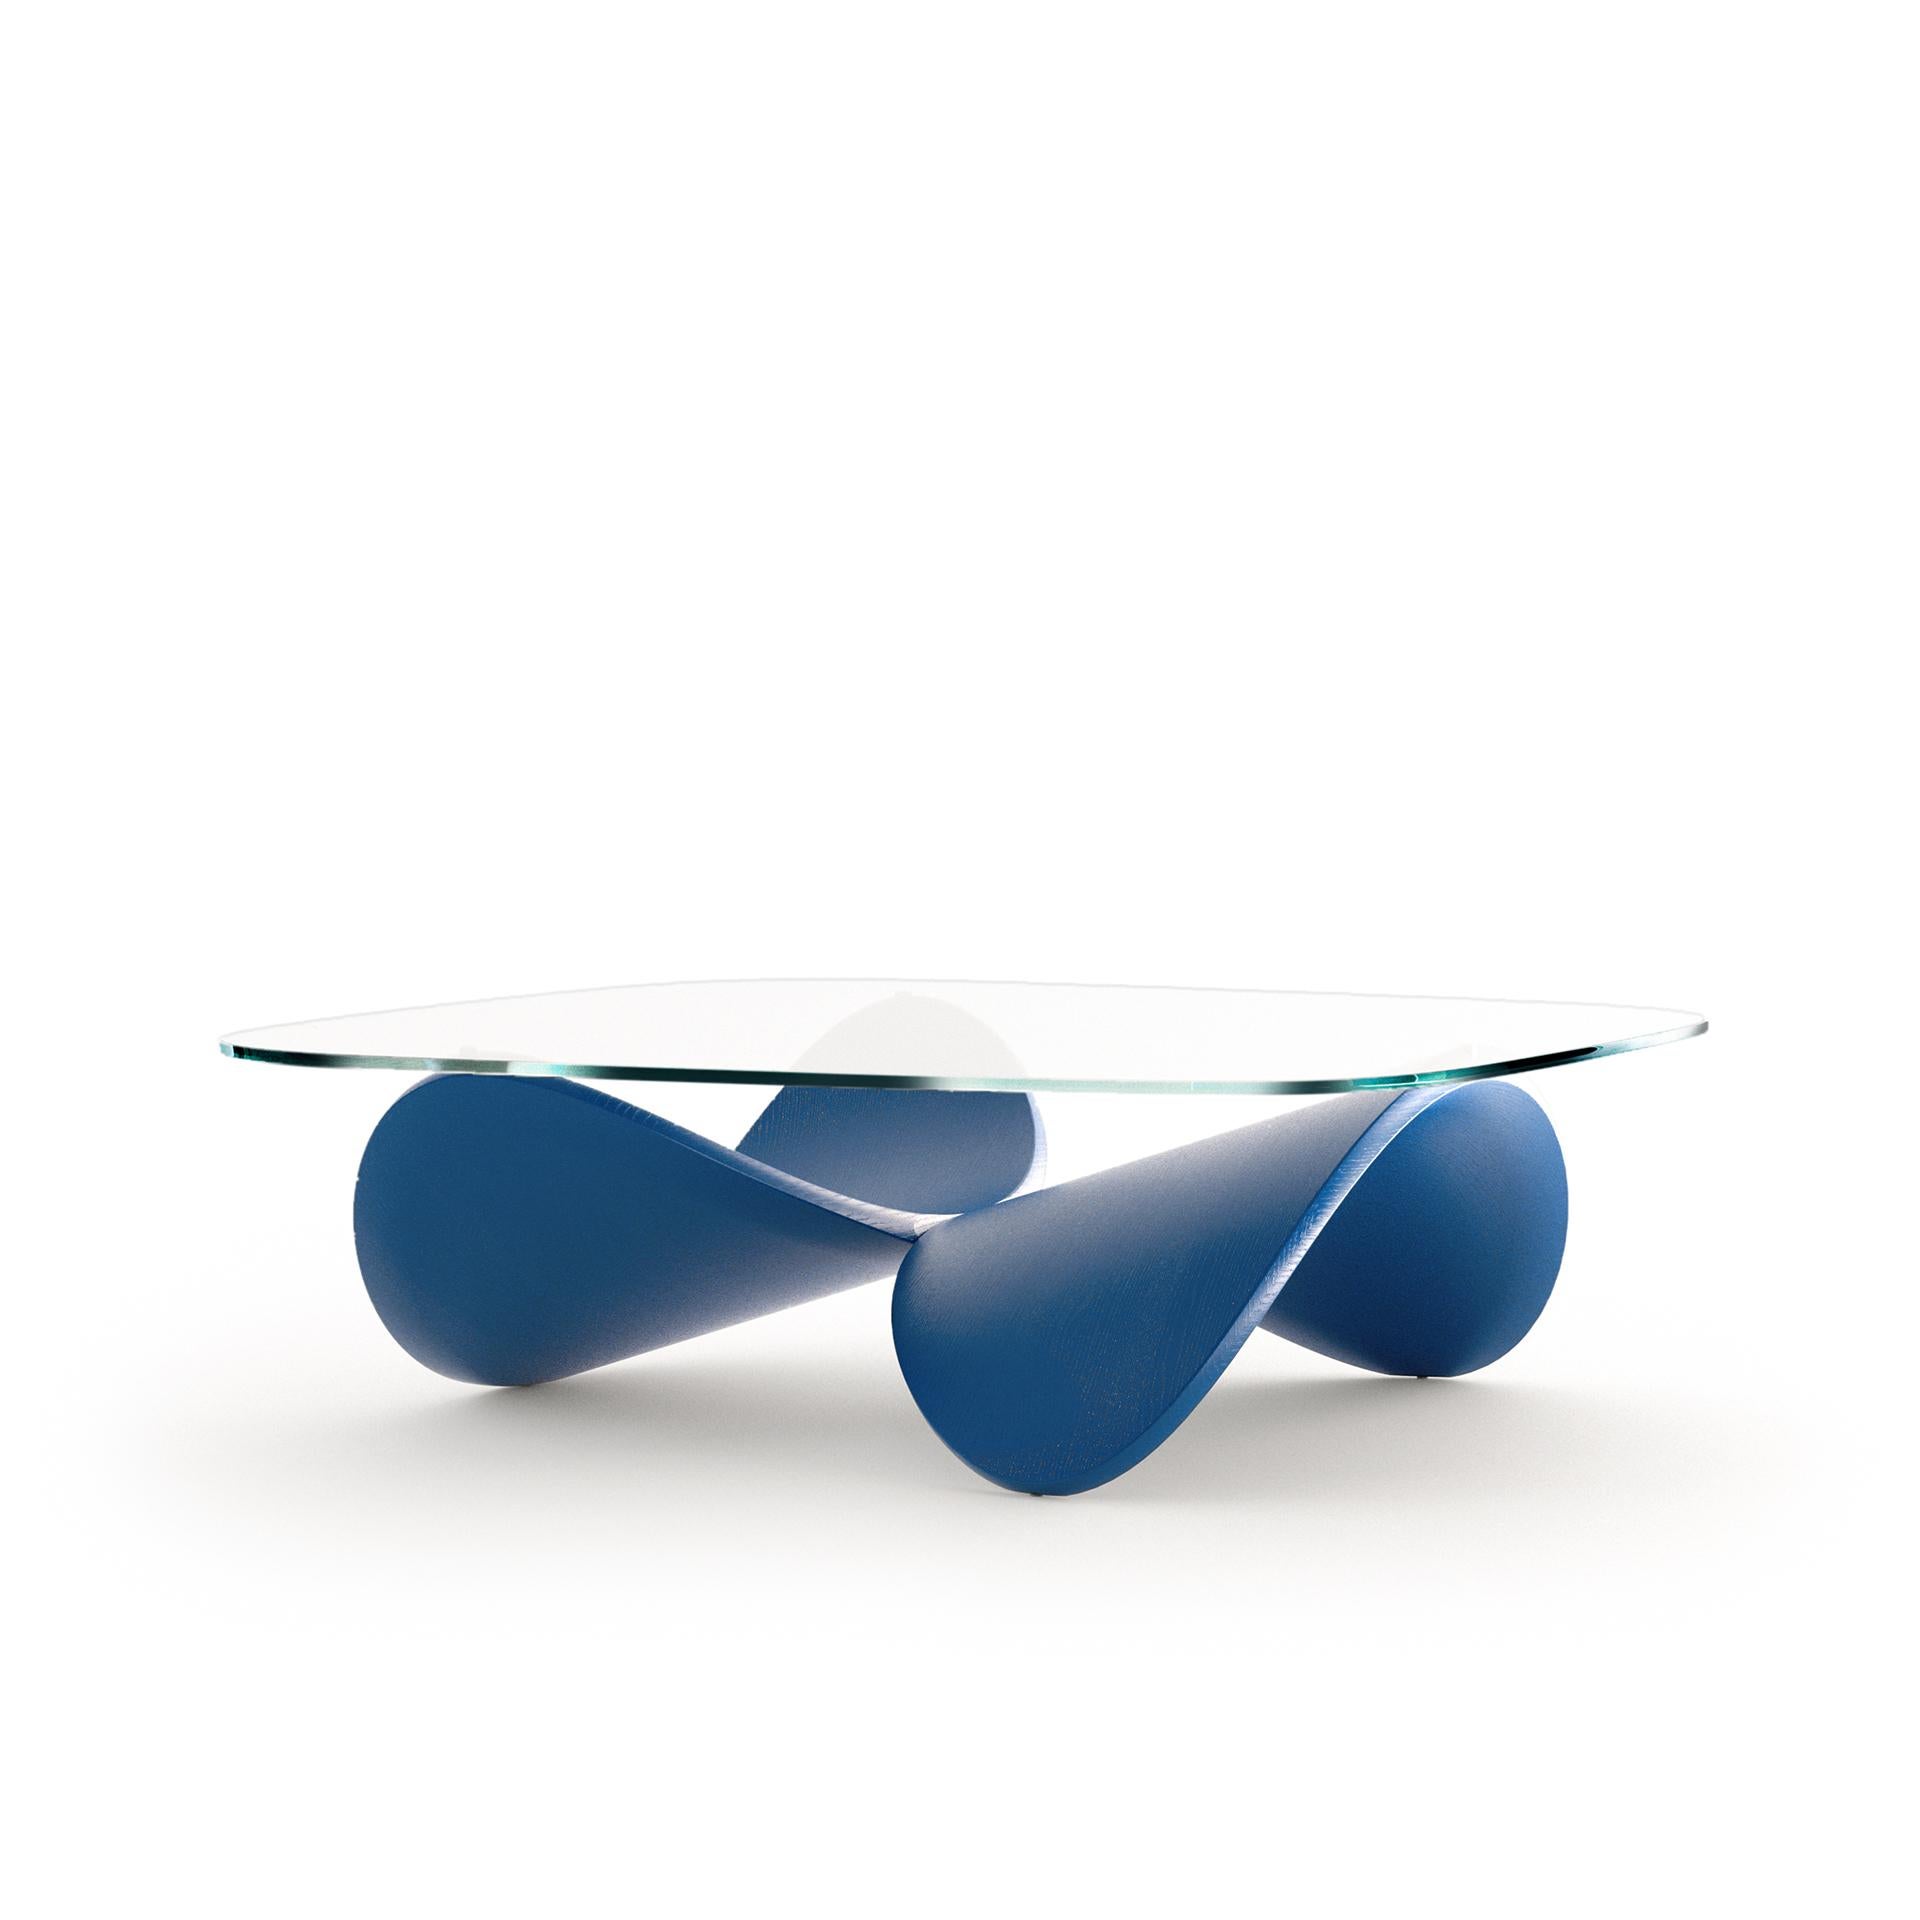 A limited edition coffee table made for living spaces that are looking to express uniqueness and a distinctive character. As a piece it is both furniture and sculpture. Once in a room, it expands the spacial quality of the interior by offering new